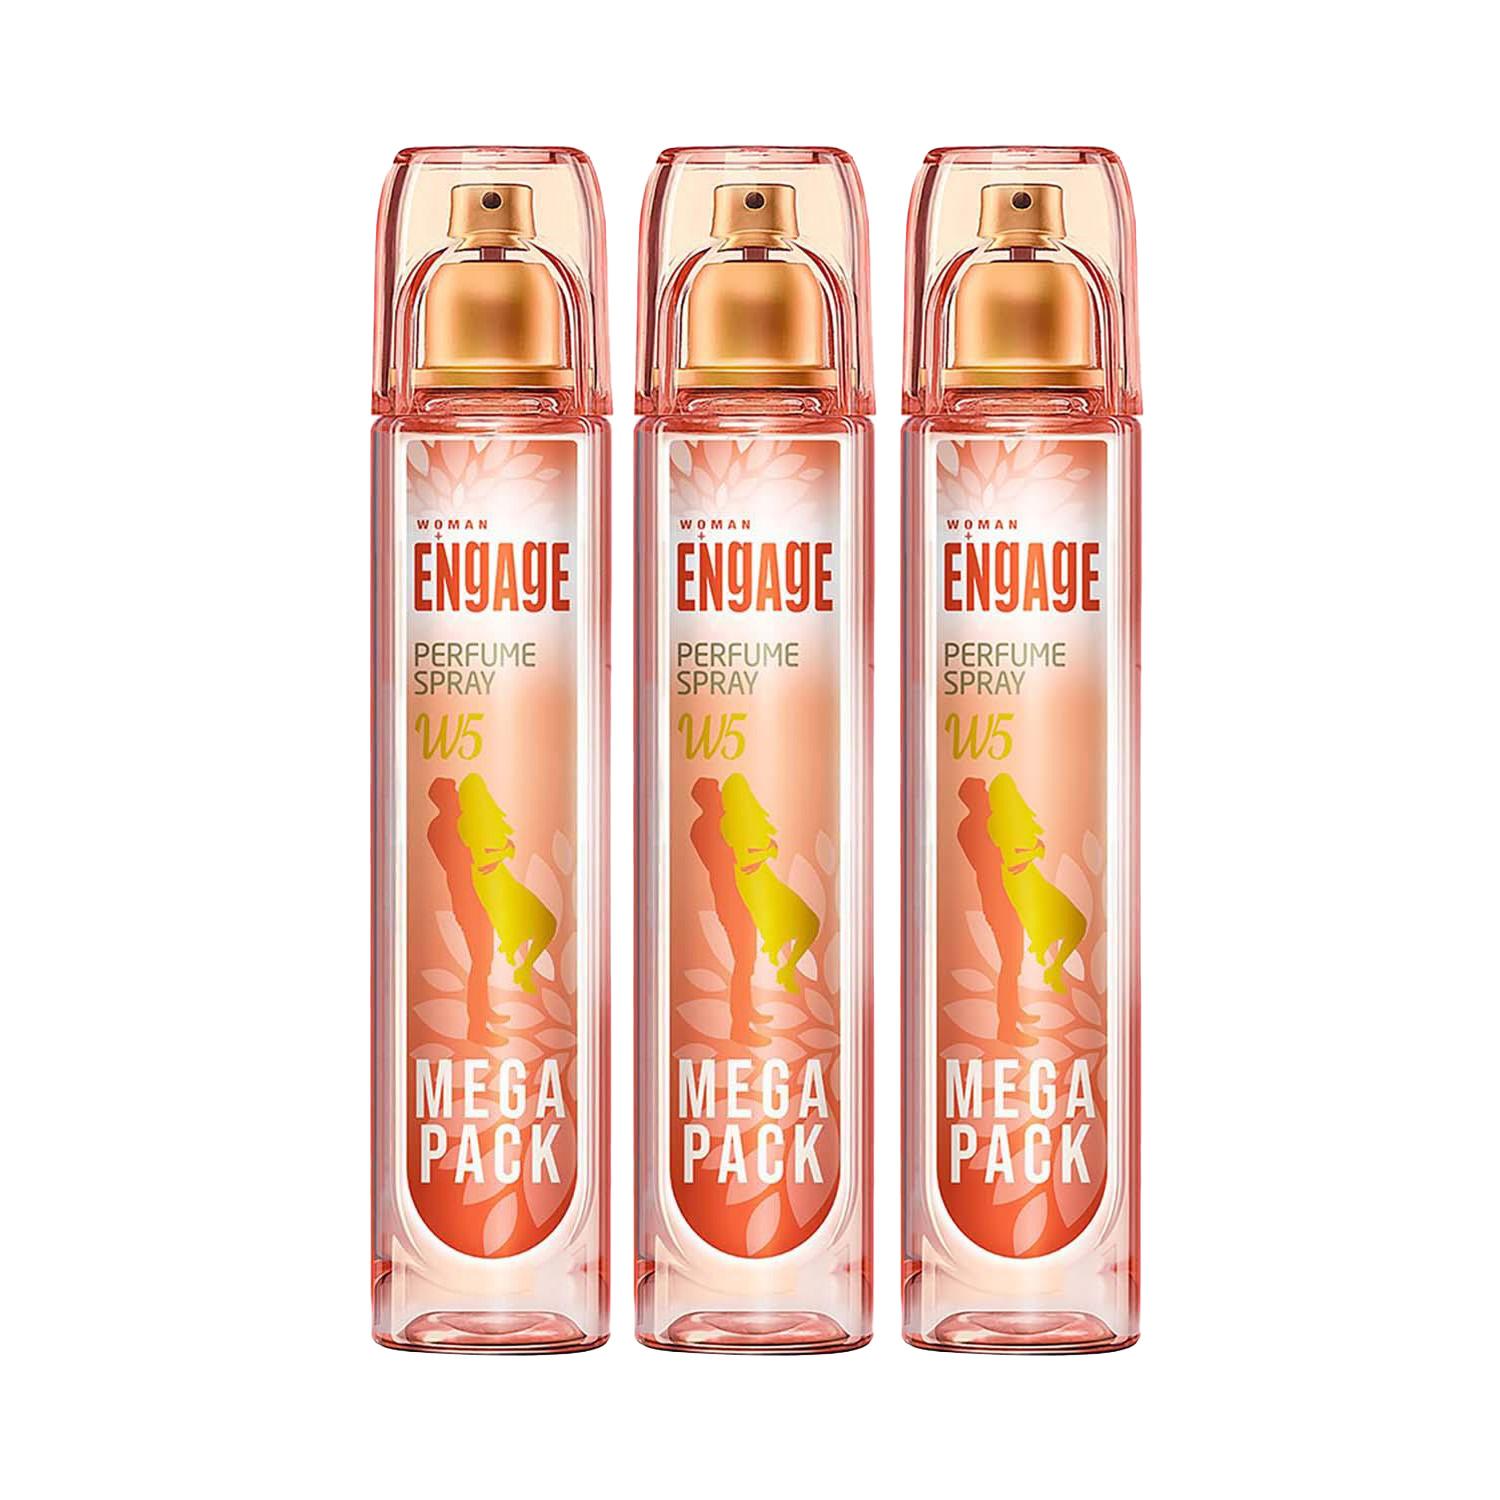 Engage | Engage Perfume Spray W5 For Women (160 ml) (Pack of 3) Combo